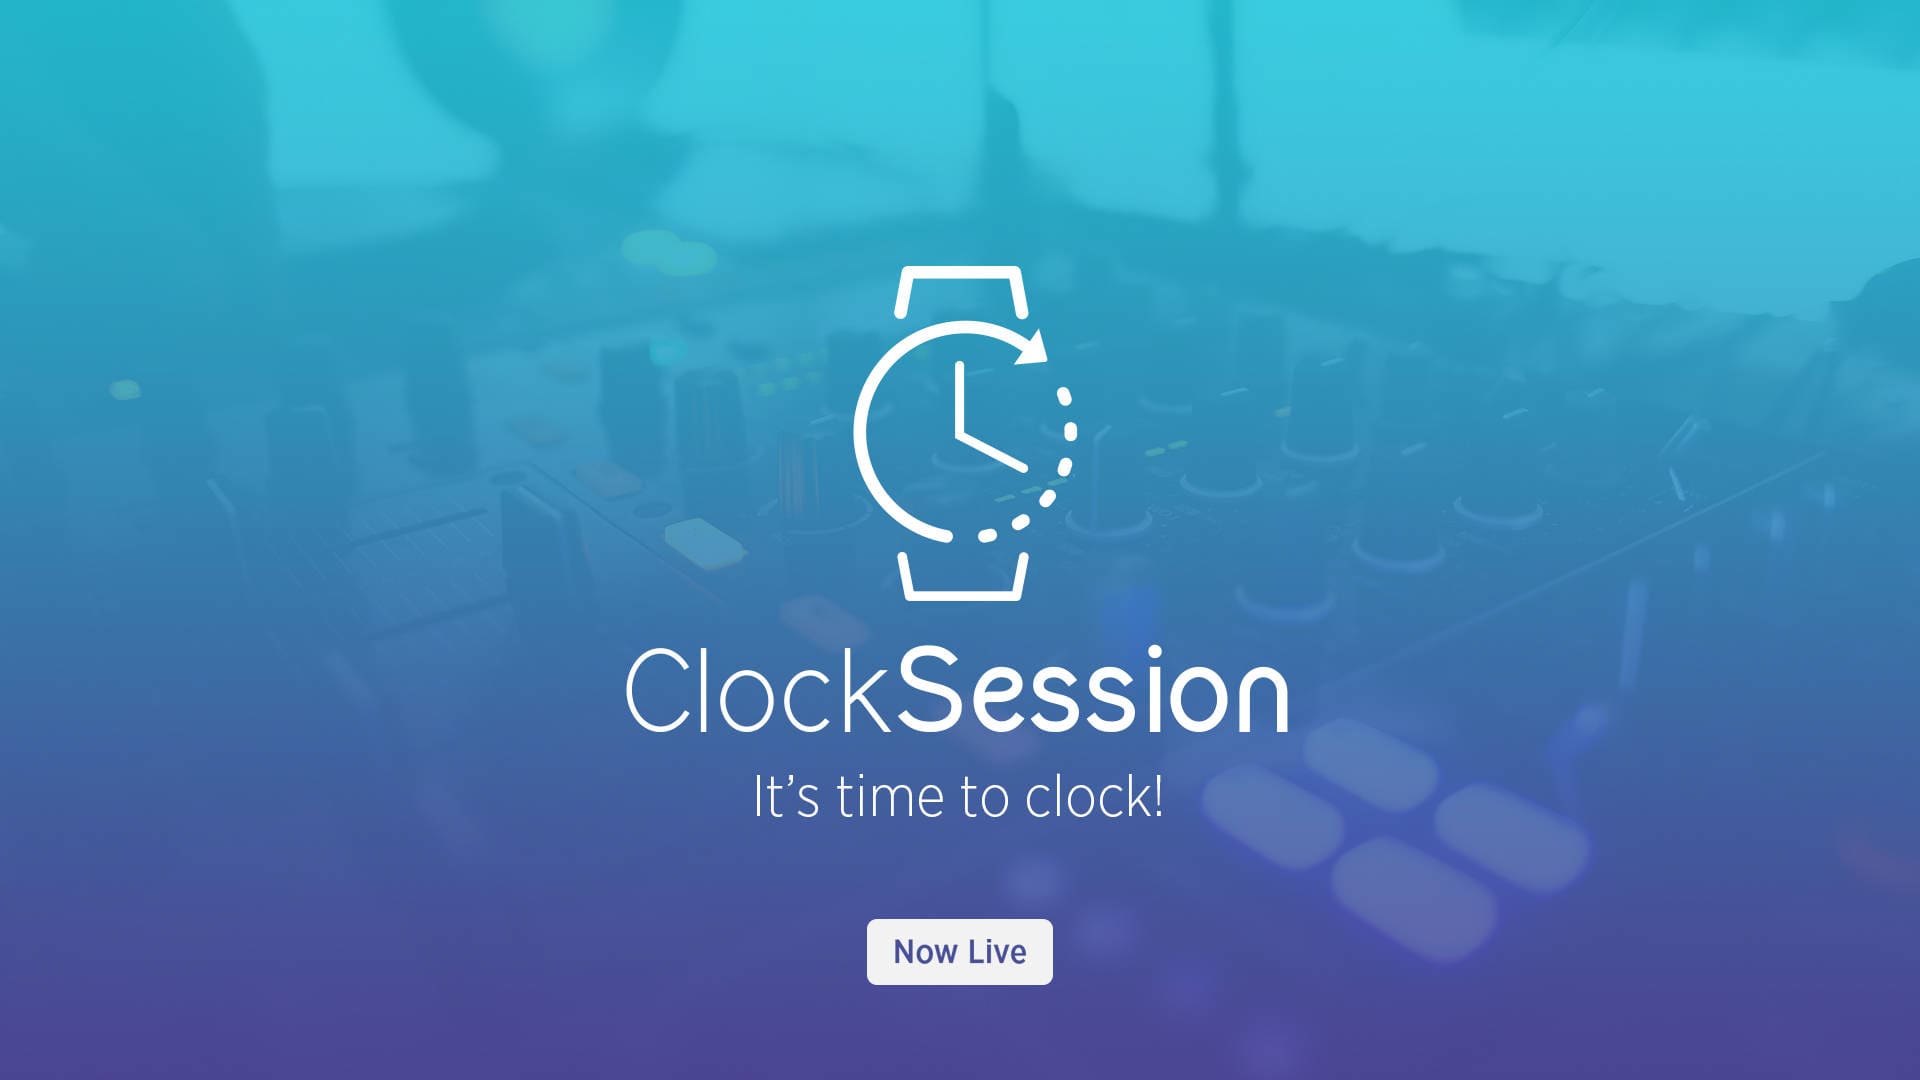 CLOCKBEATS - THE MAGIC OF THE CLOCK SESSION BECOMES A PARTY